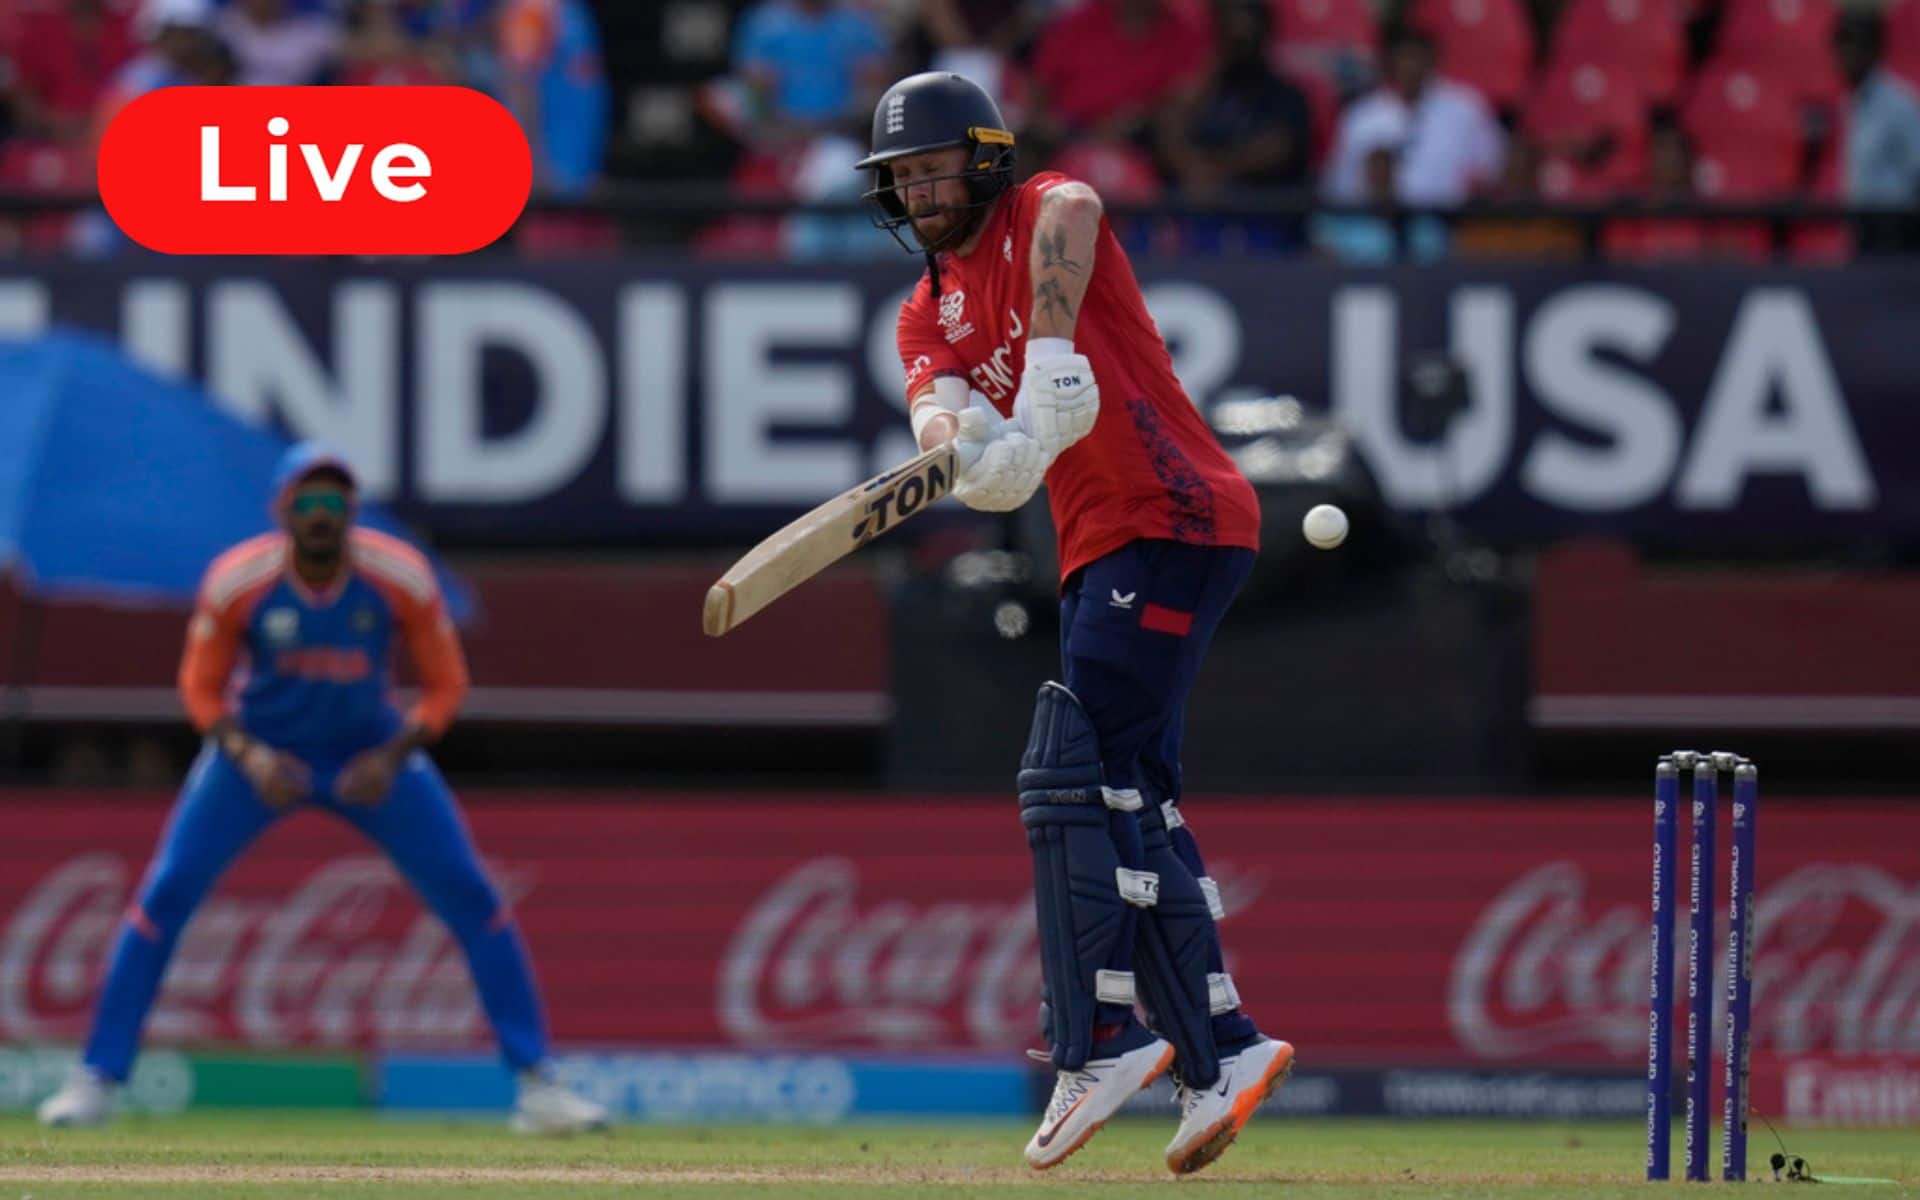 T20 World Cup 2024, IND Vs ENG Live Score: Match Updates, Highlights & Live Streaming